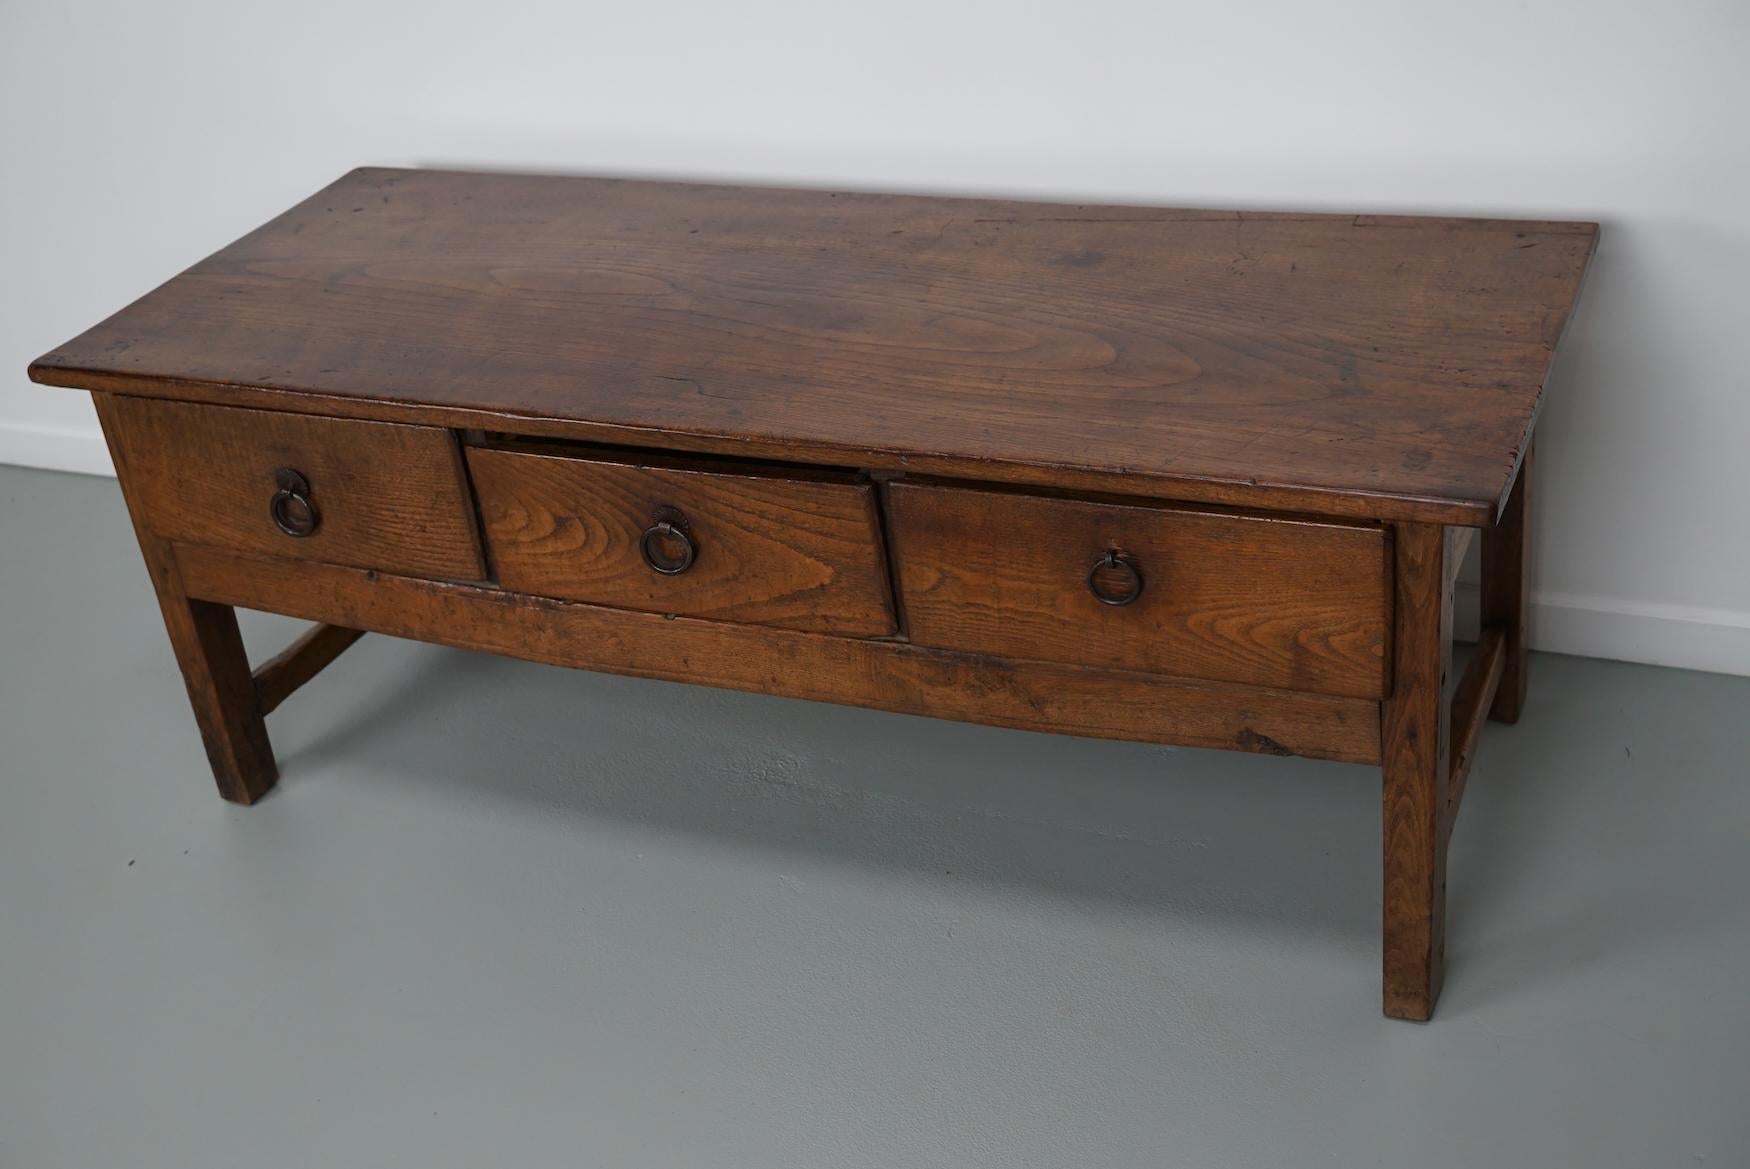 This coffee table was converted from an old 18th century chestnut farmhouse prepping table. It retained a very nice patina and rich color / fading over the years and has a practical size with three drawers.